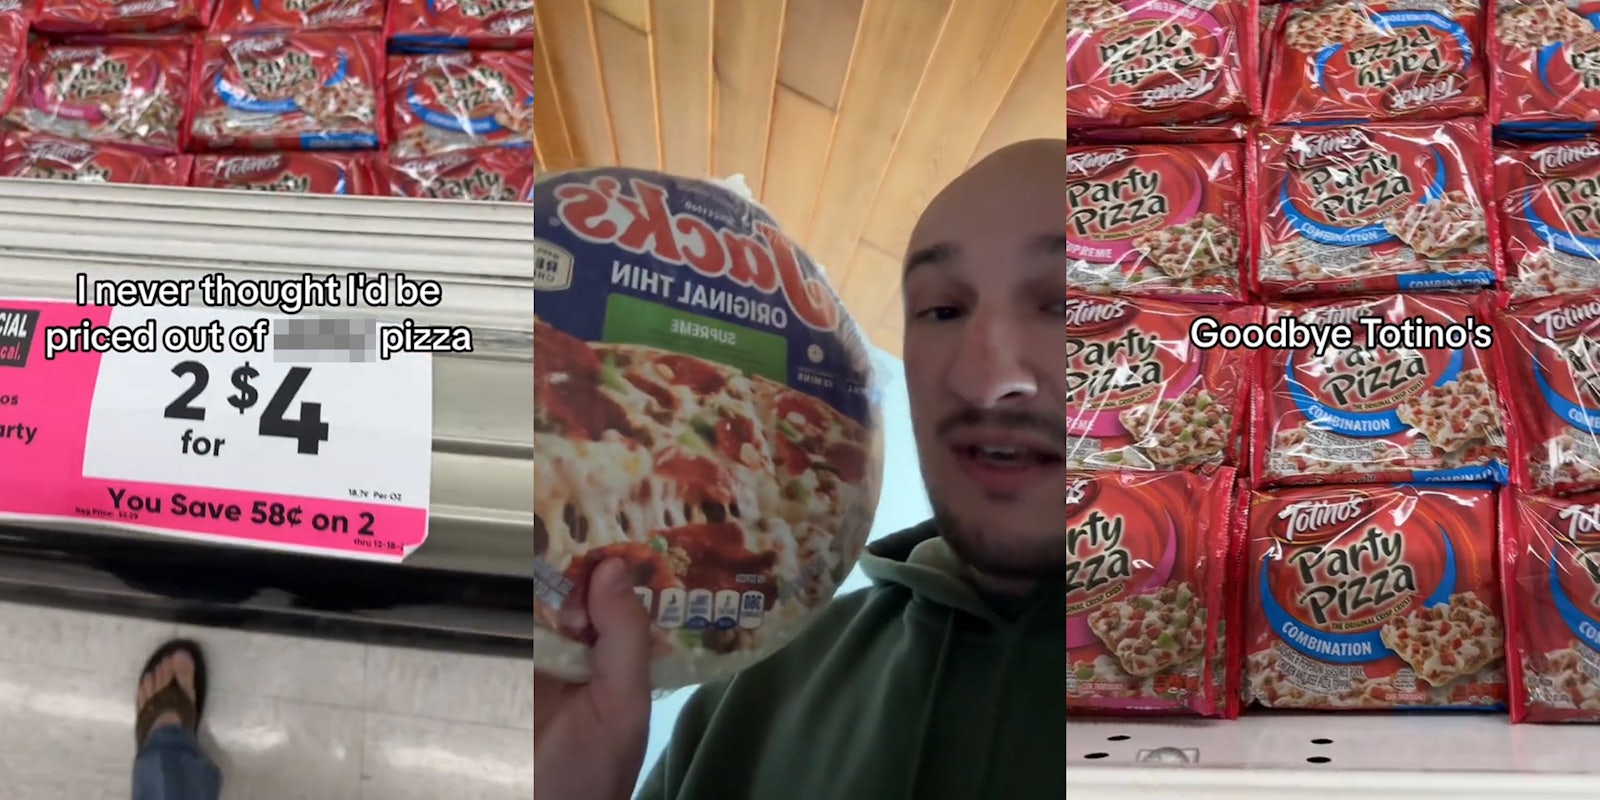 Totino's pizza on display at store with caption 'I never thought I'd be priced out of blank pizza' (l) shopper holding Jack's frozen pizza (c) Totino's pizza on display at store with caption Goodbye Totino's' (r)